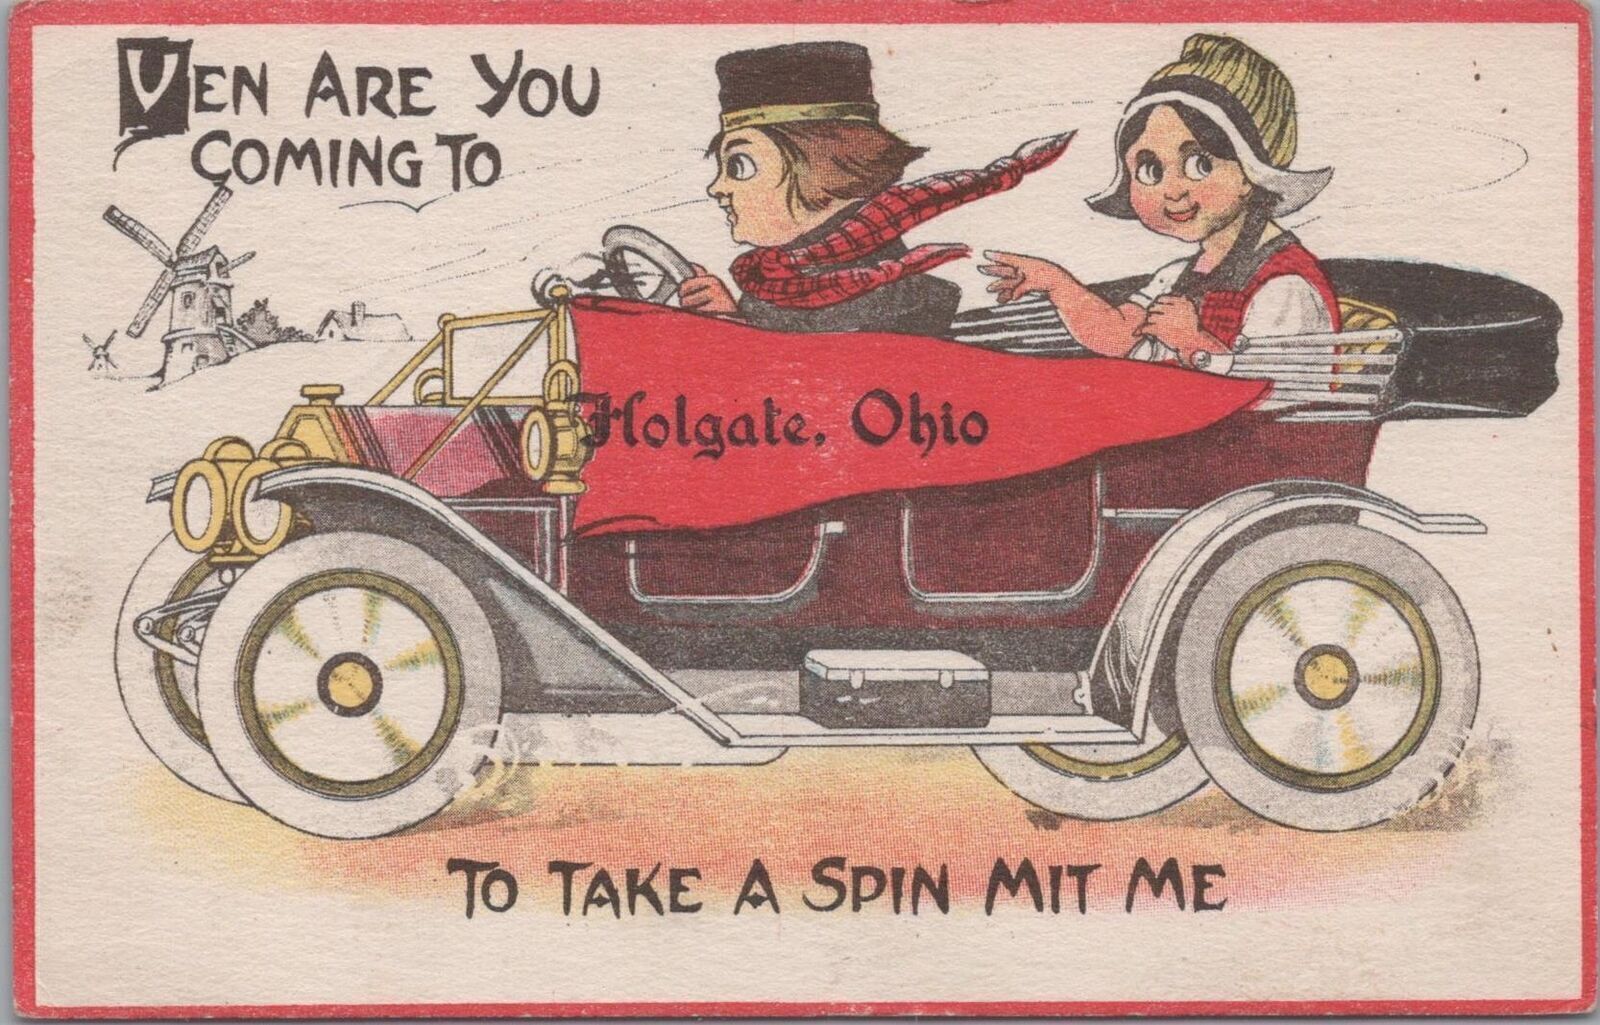 Postcard When Are You Coming to Holgate Ohio 1913